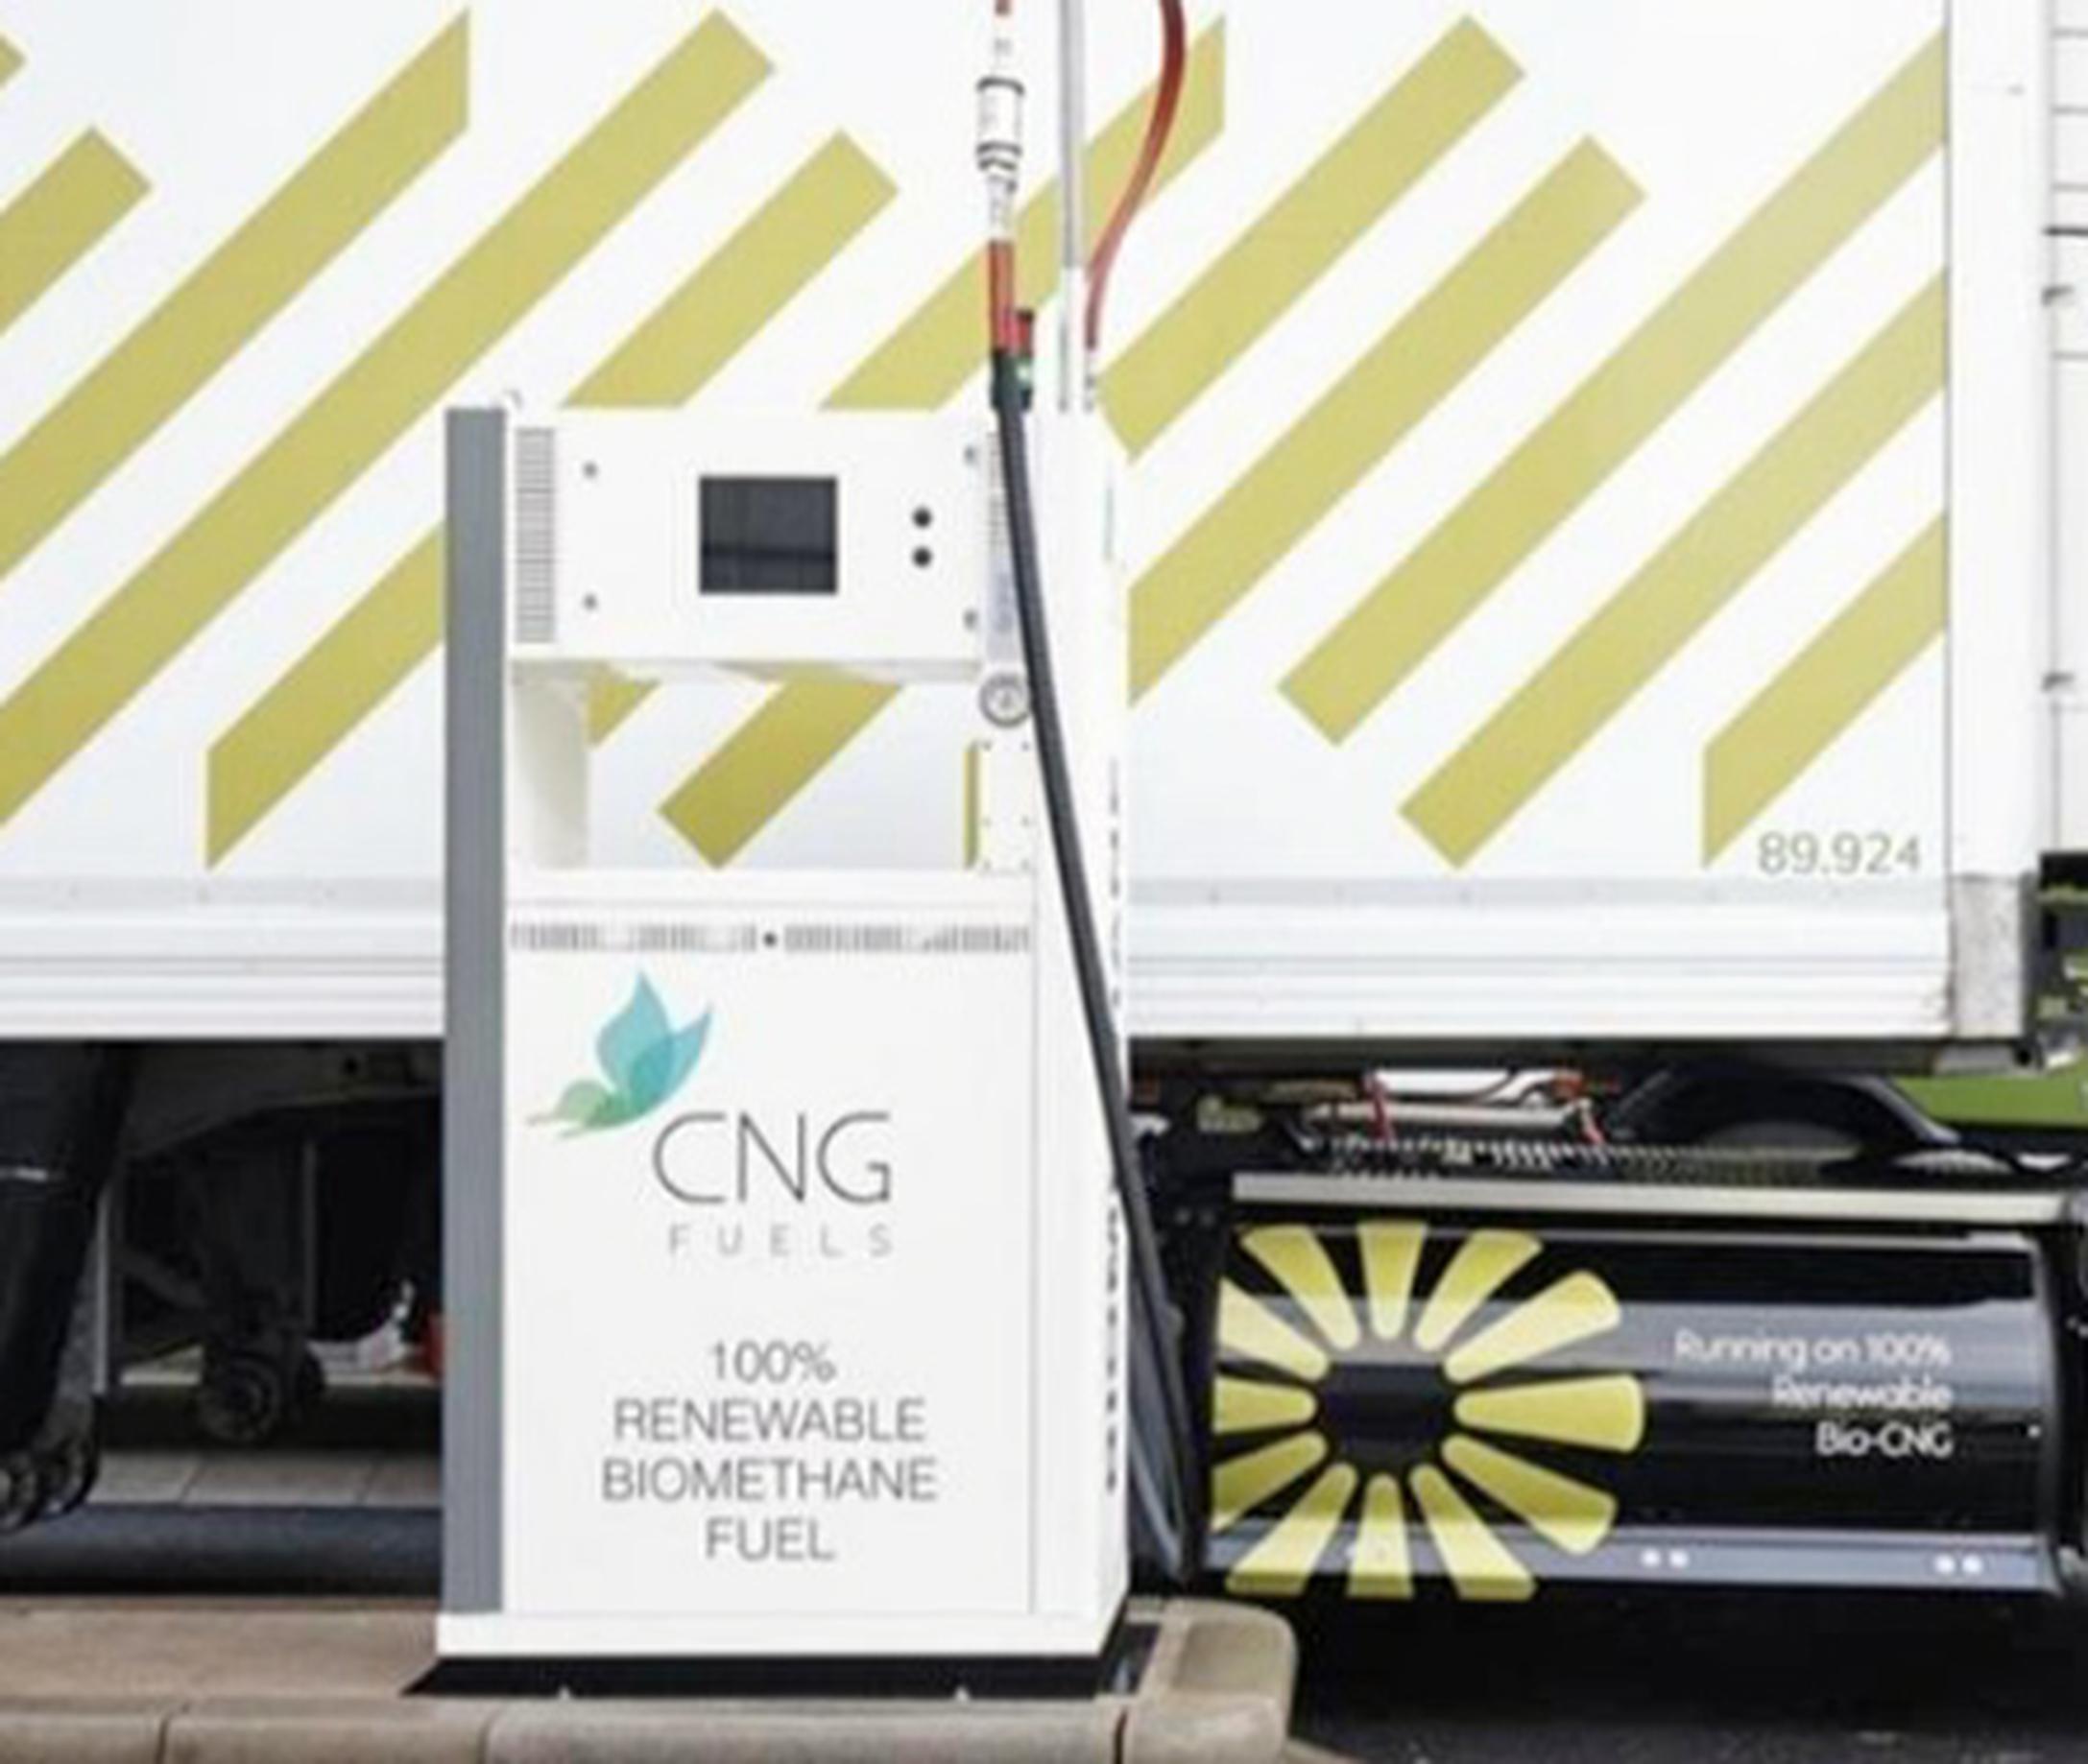 CNG: not suited to urban speeds